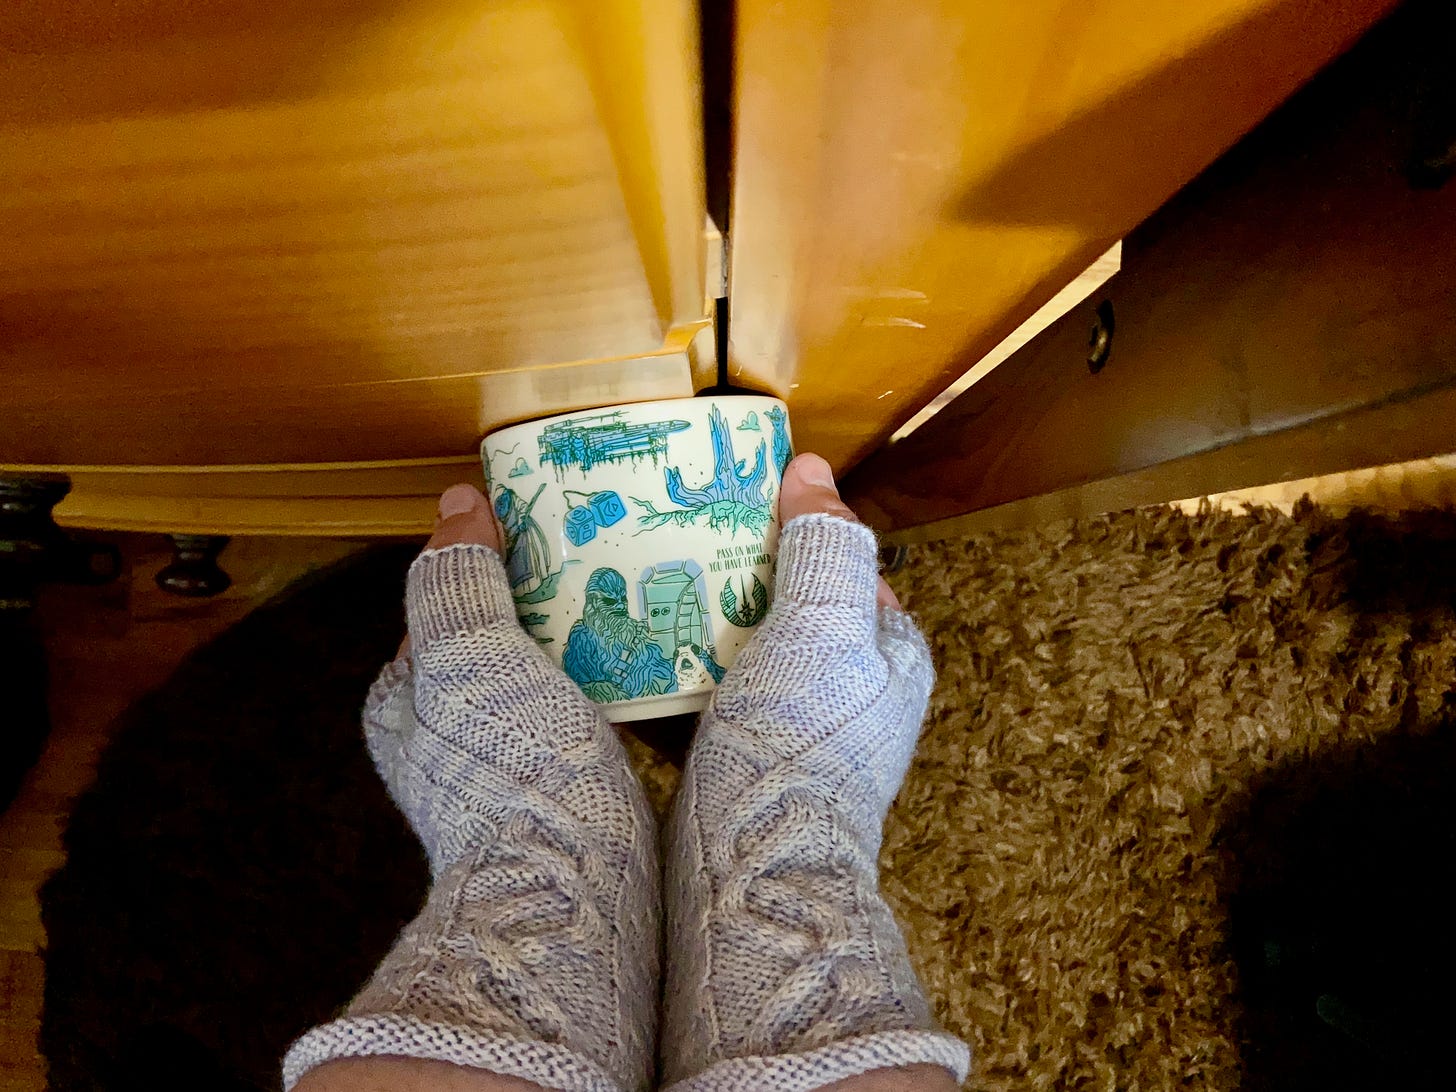 I'm wearing lavender-colored fingerless gloves that I knitted by hand while holding a Star Wars-themed coffee cup sideways. It's positioned against a dresser, and you can see a brown rug below.